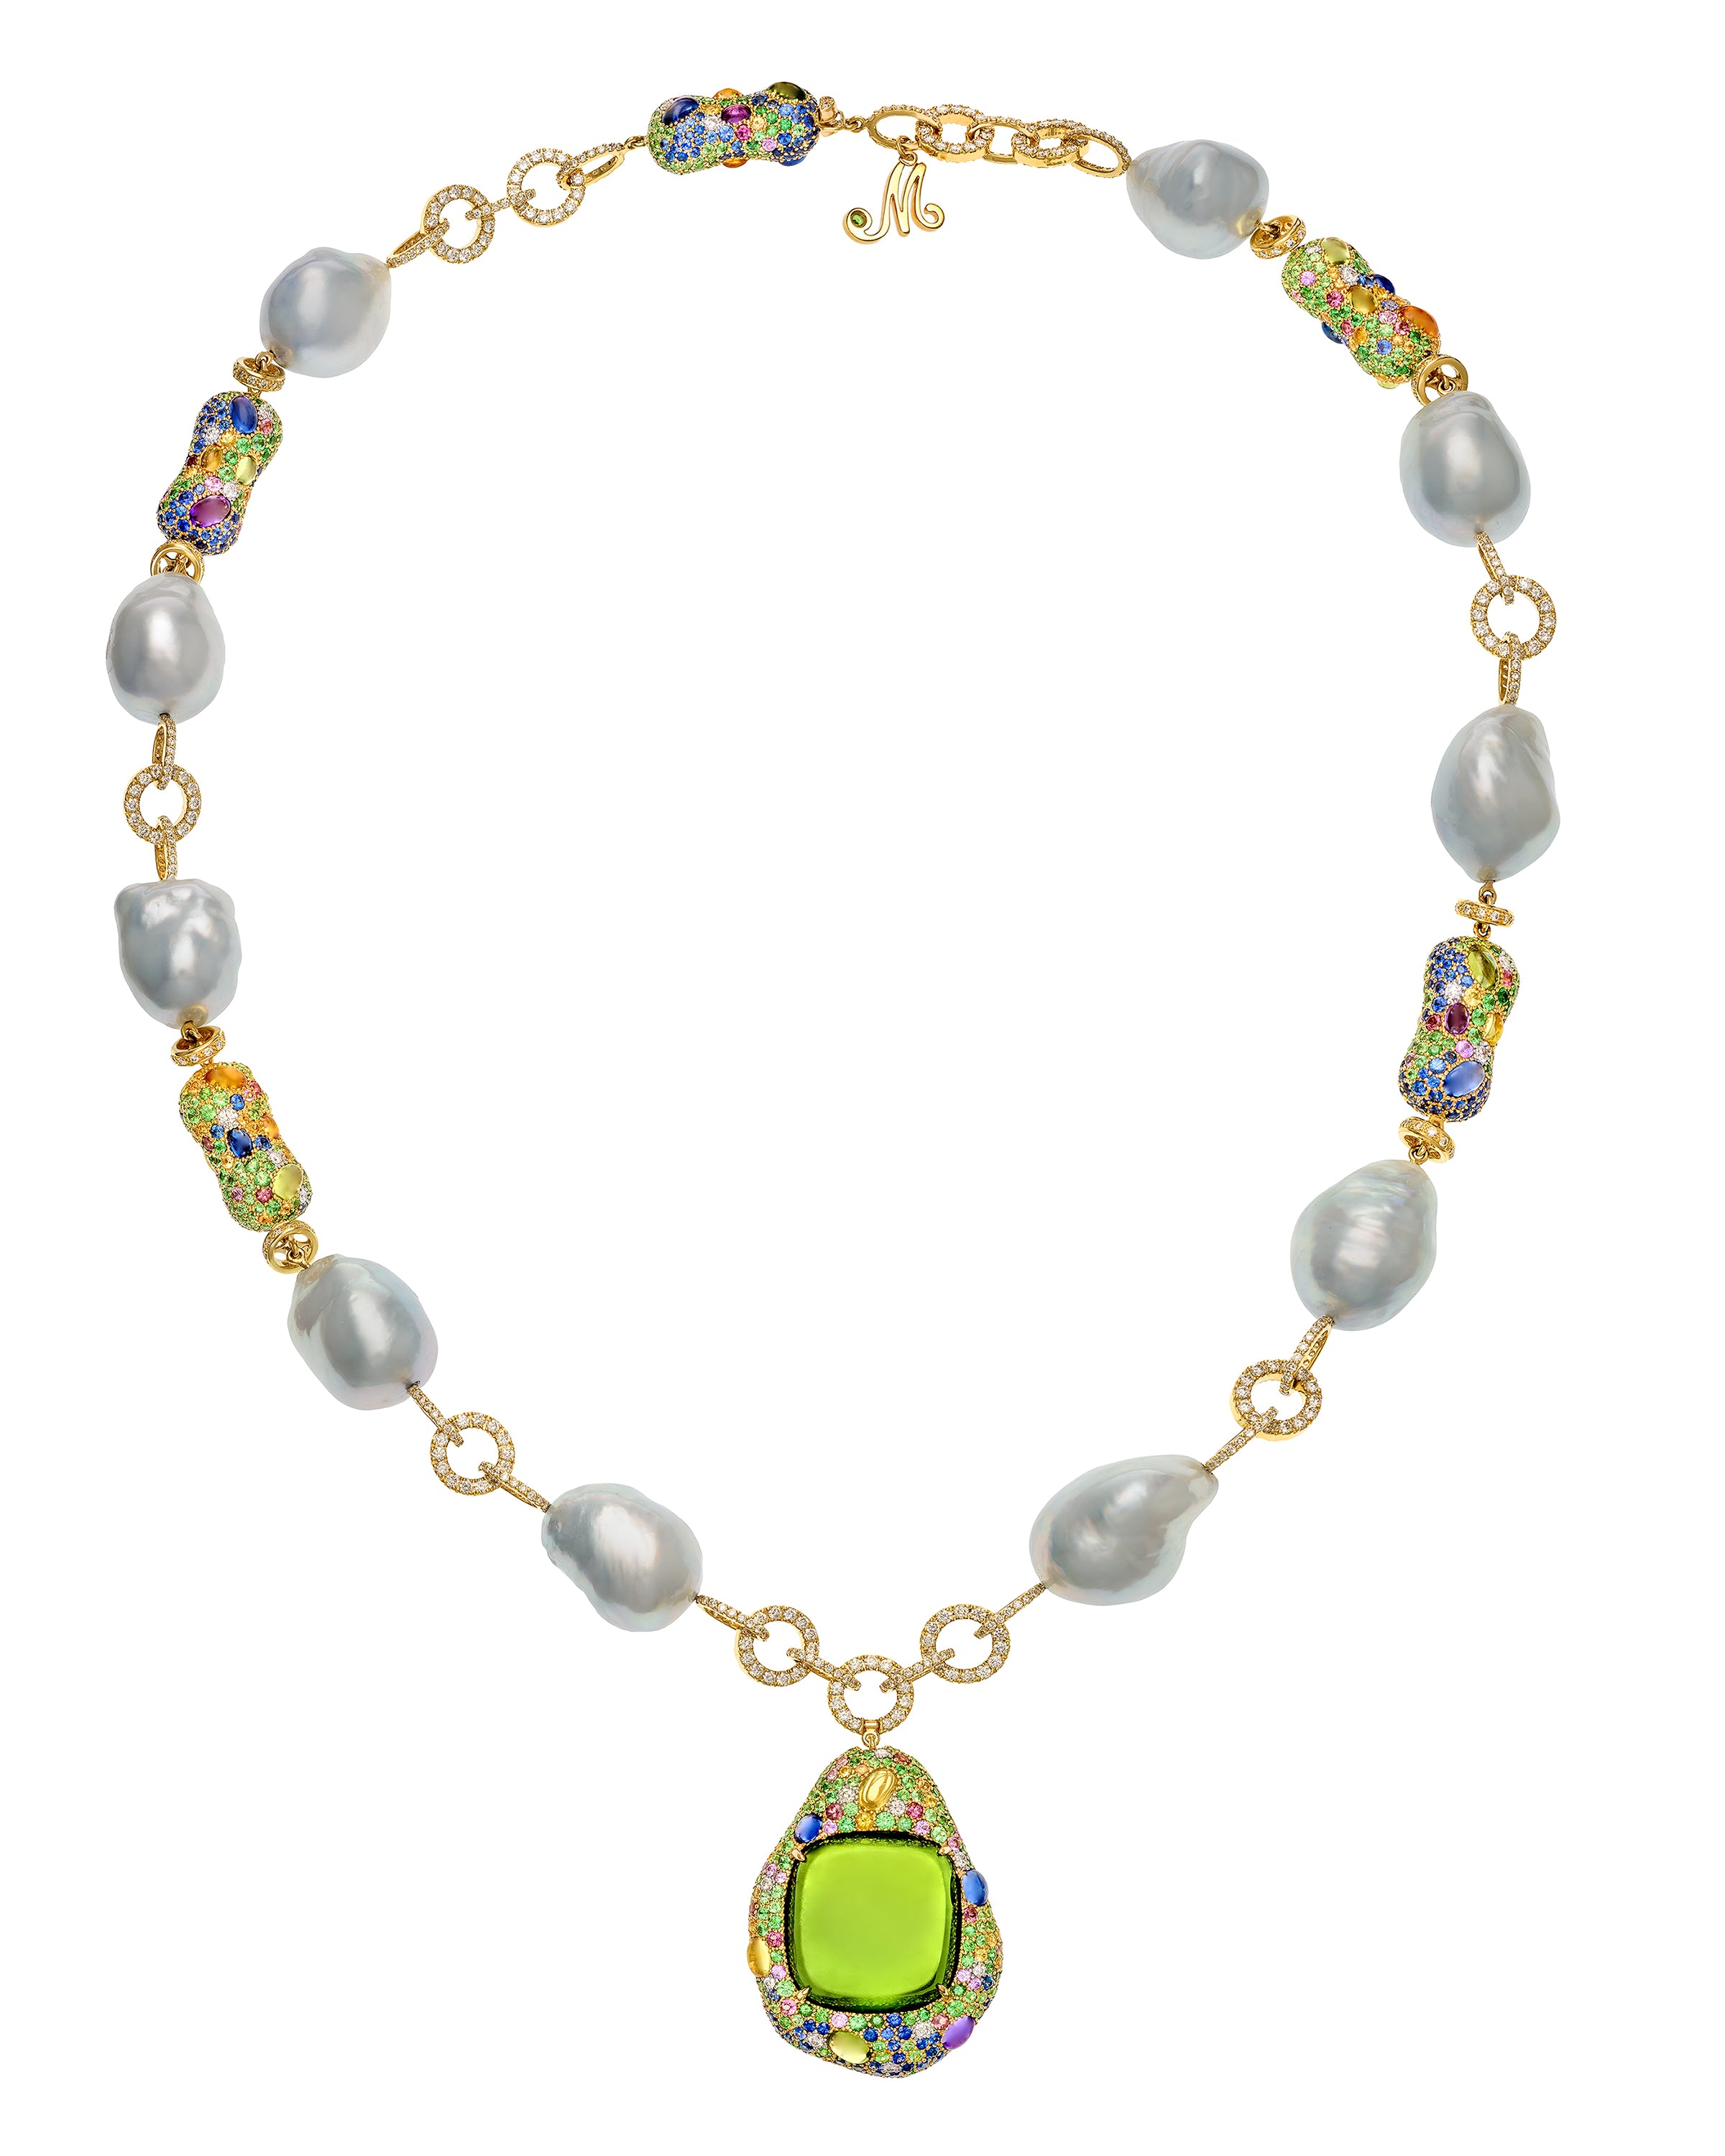 Green tourmaline necklace featuring South Sea pearls enhanced with a myriad of gemstones, crafted in 18 karat yellow gold.